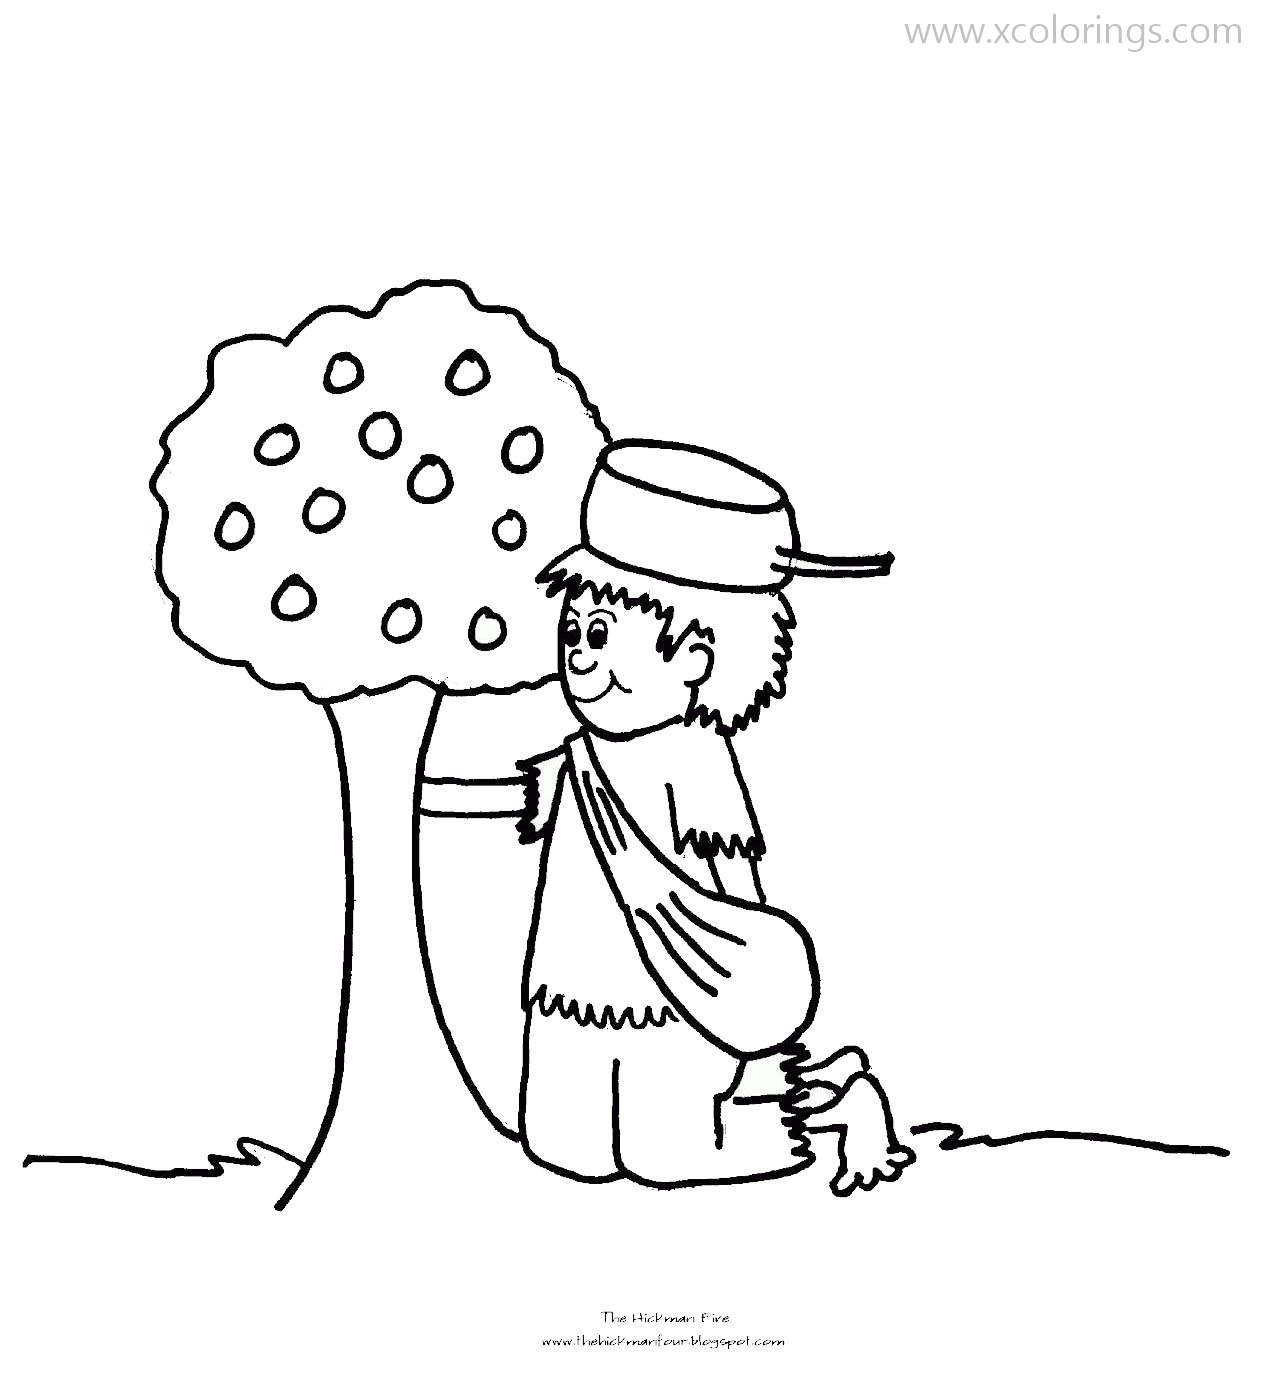 Free Animated Johnny Appleseed Coloring Pages printable